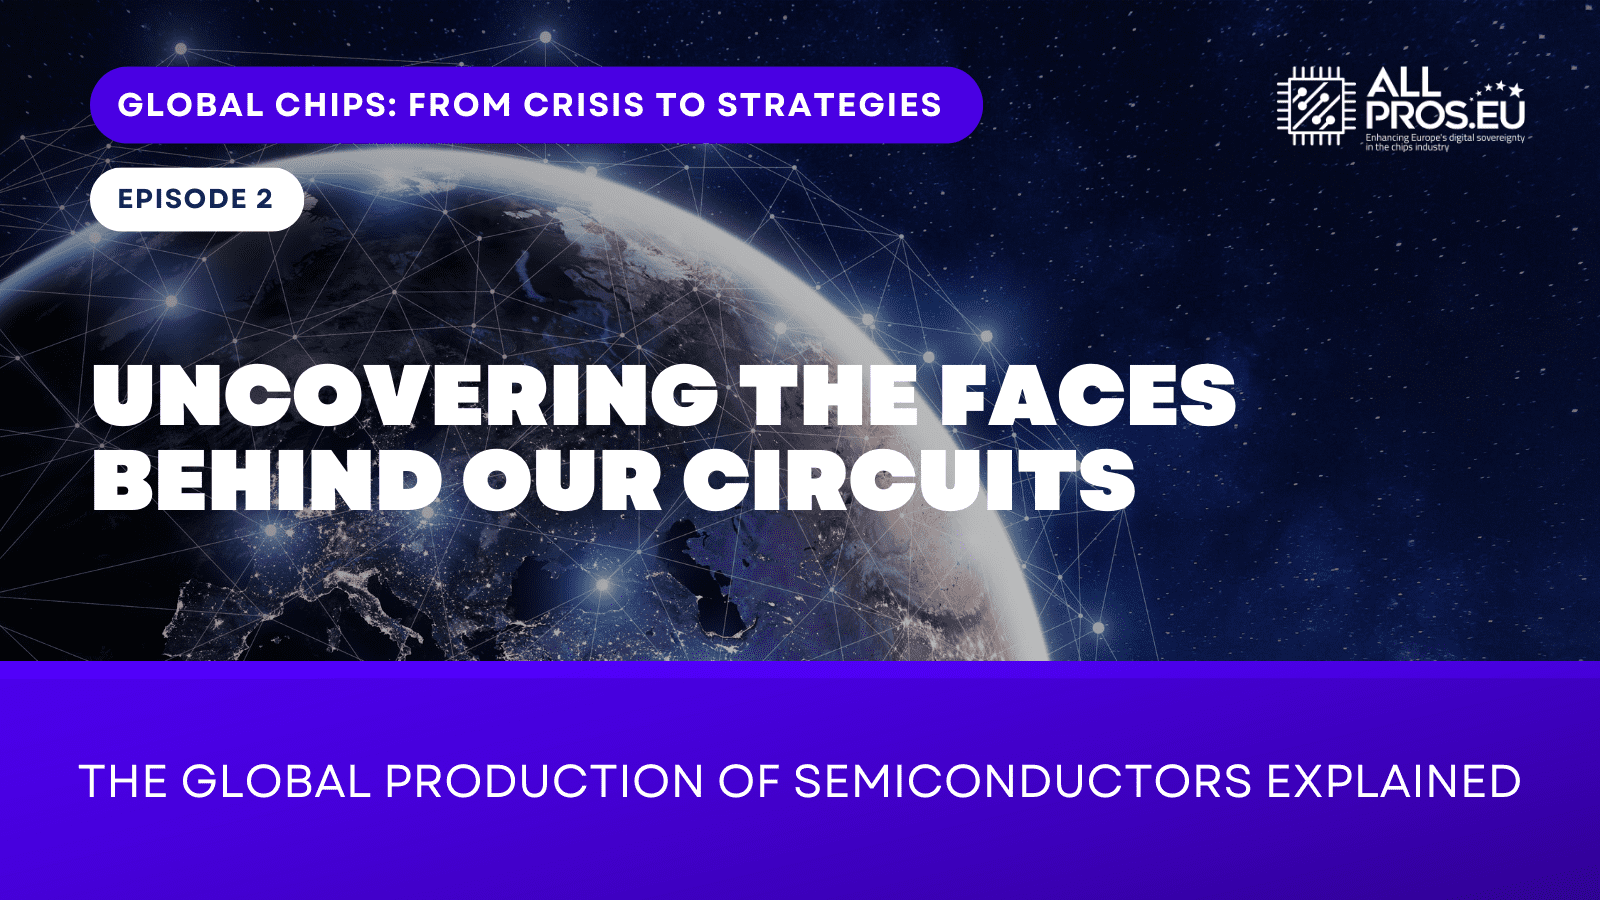 Uncovering the faces behind our circuits: the global production of semiconductors